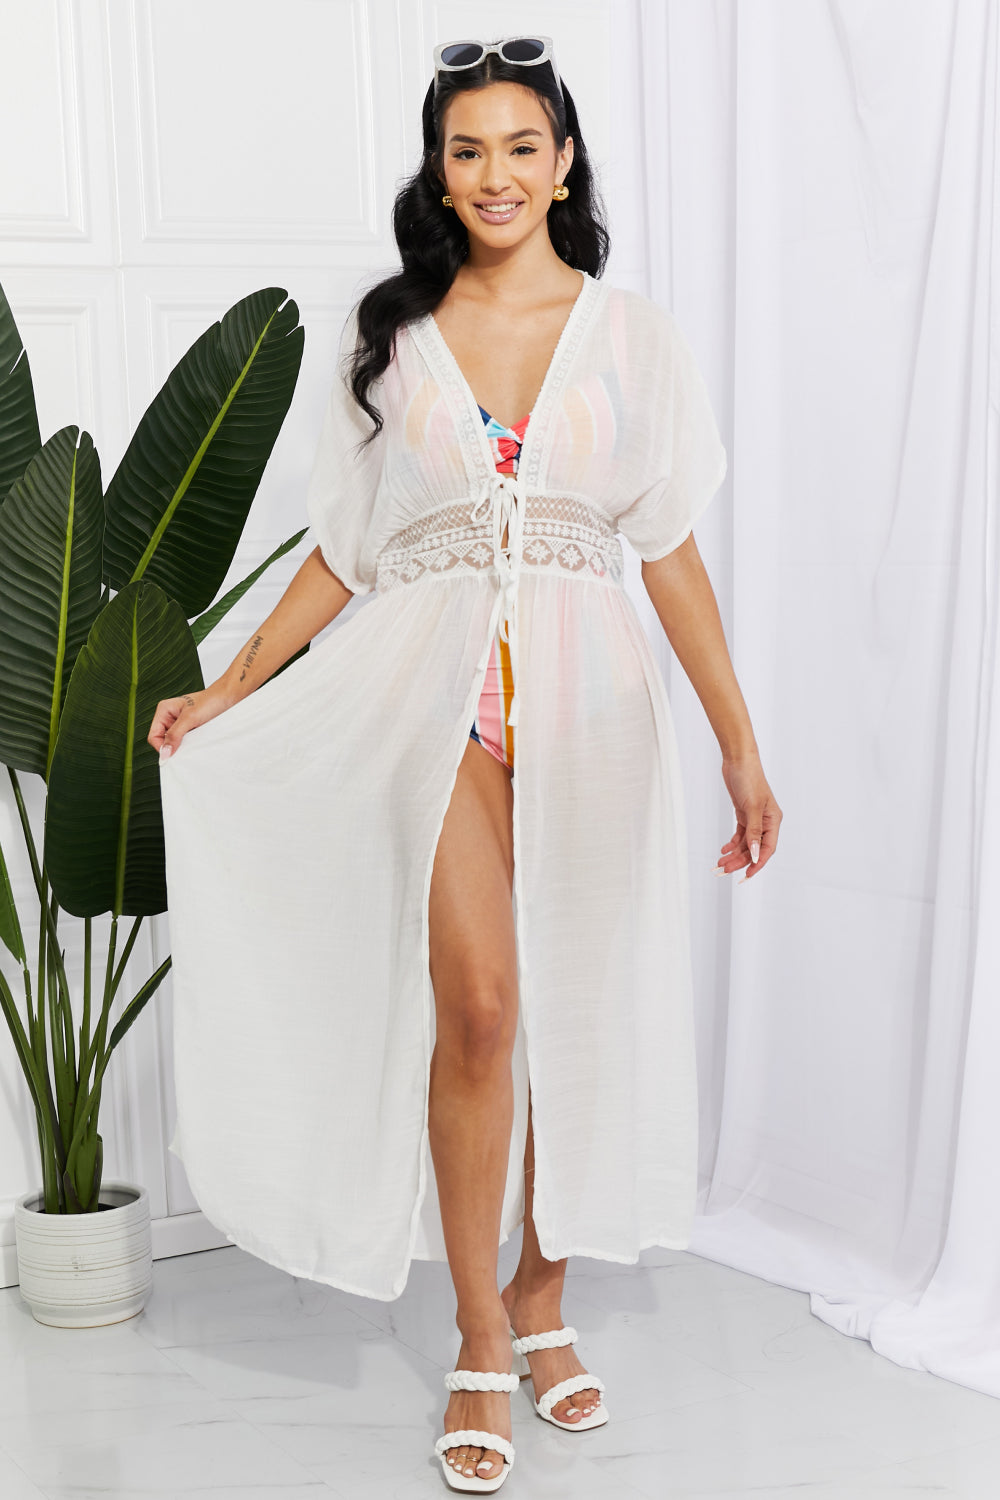 Marina West Swim Sun Goddess Tied Maxi Cover-Up - Online Only